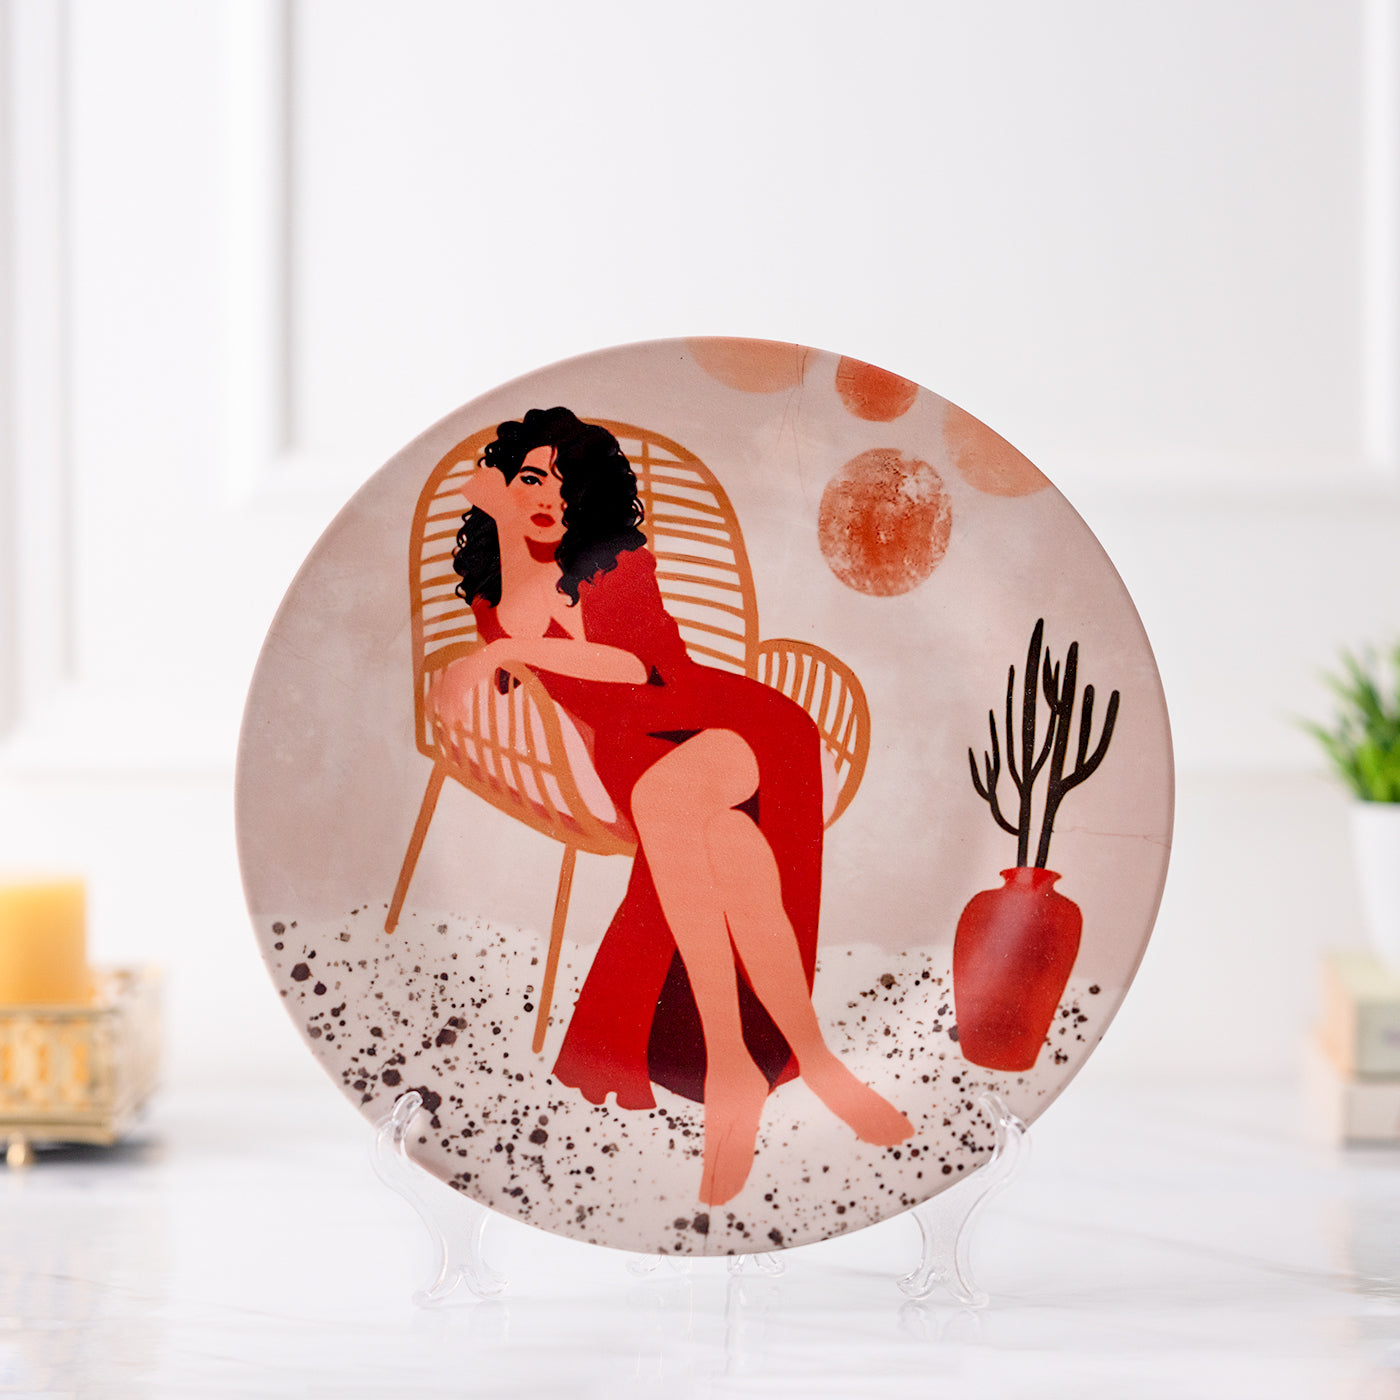 Graphic Glam Ceramic wall plates decor hanging / tabletop